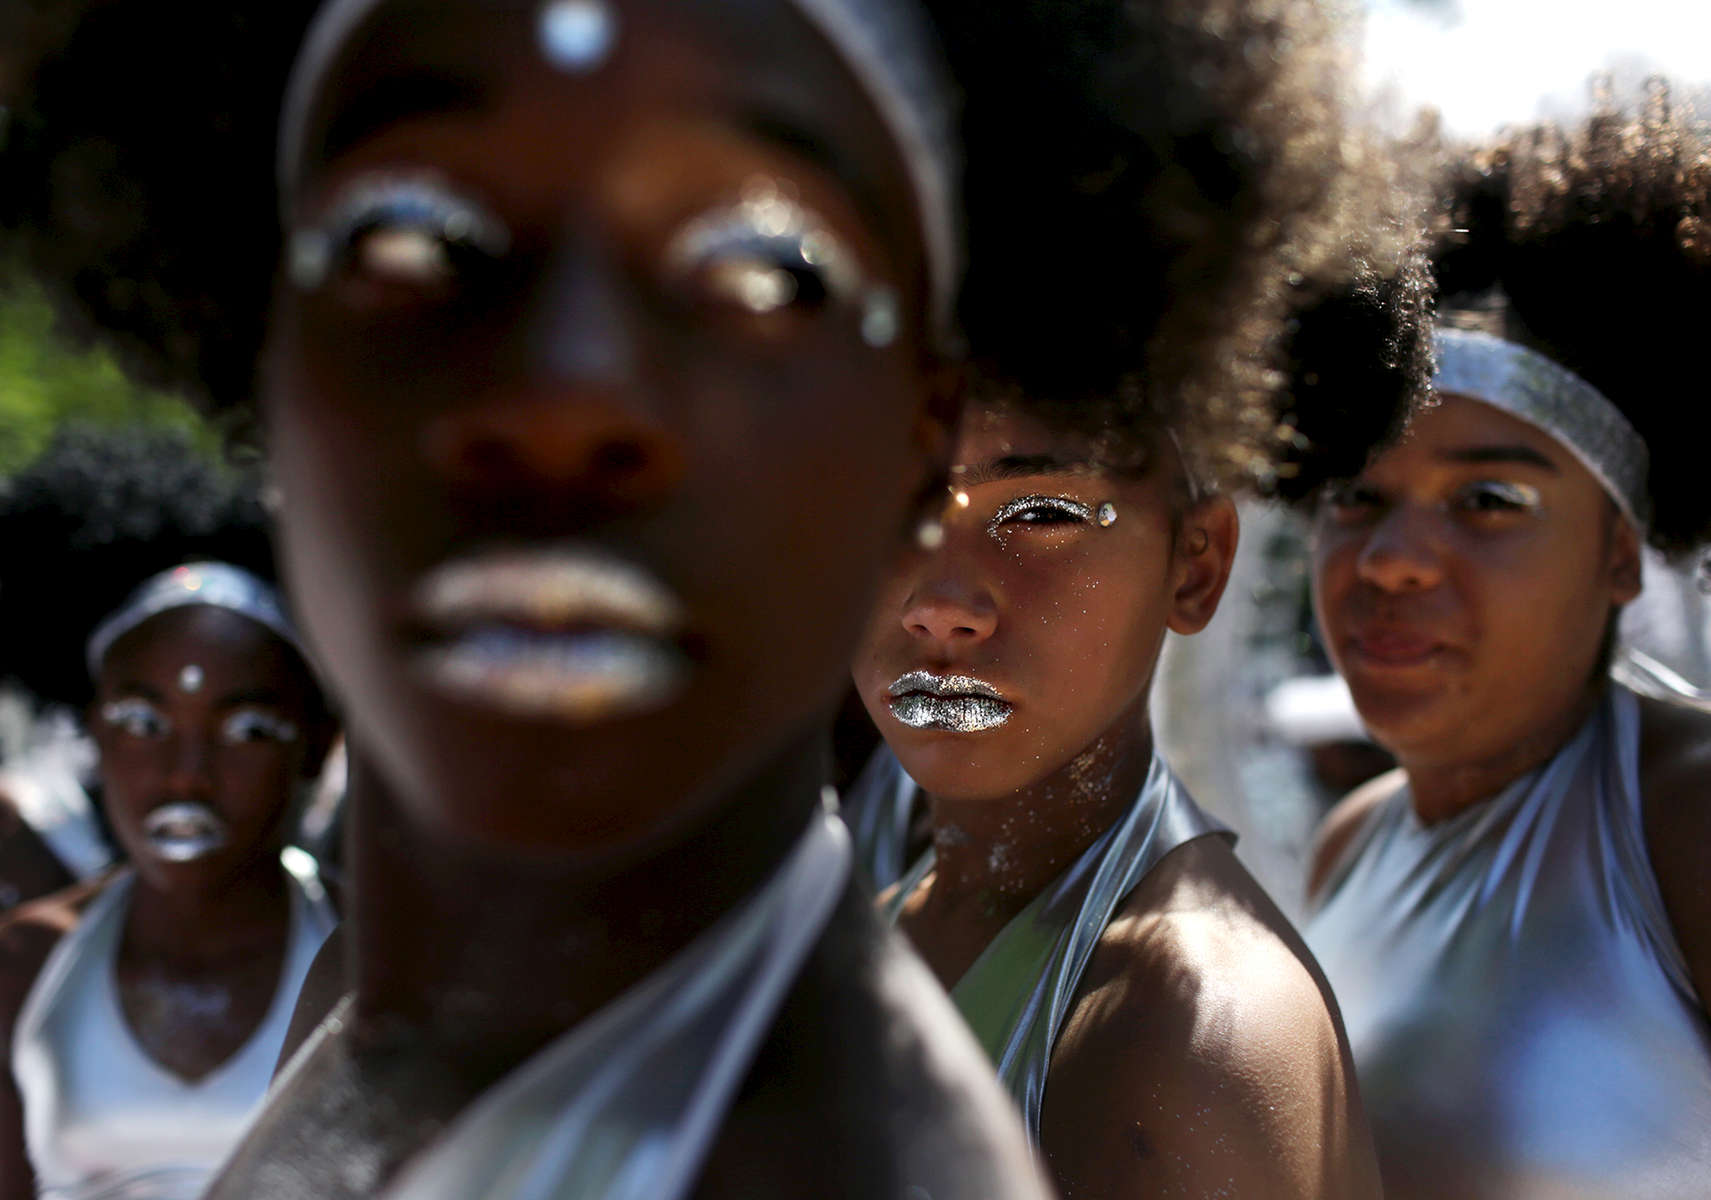 The Visions In Motion dance group prepares to march down Eastern Parkway for the West Indian American Day Parade, in celebration of the Caribbean Carnival on September 04, 2017 in Brooklyn, NY. (For Getty Images)